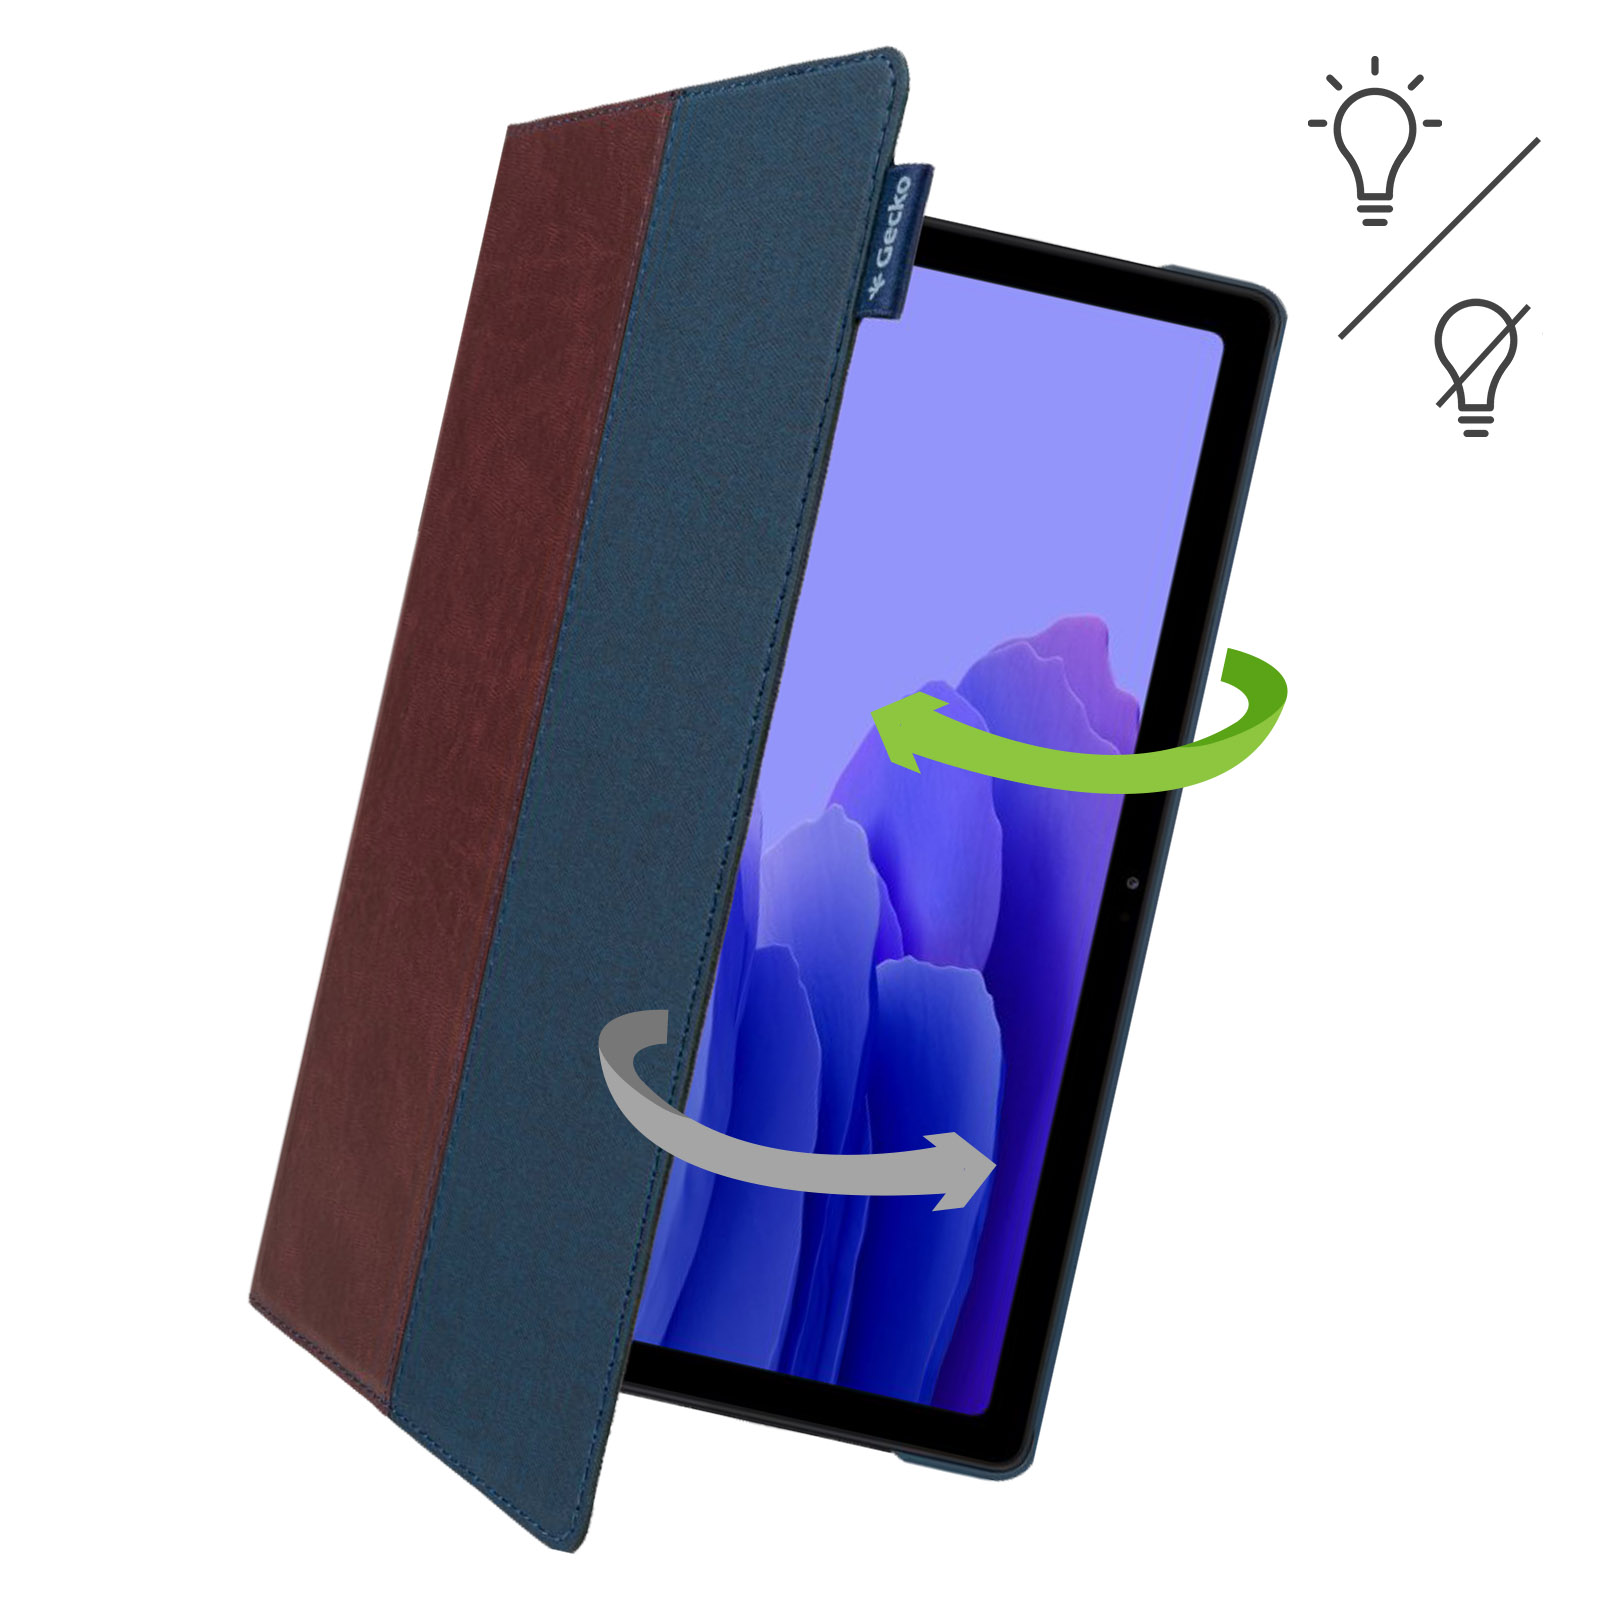 2.0 Blau,Braun Cover PU 10.4 Leather, für Galaxy Bookcover (2020) Easy-Click Samsung GECKO A7 Tab Hülle Tablet COVERS